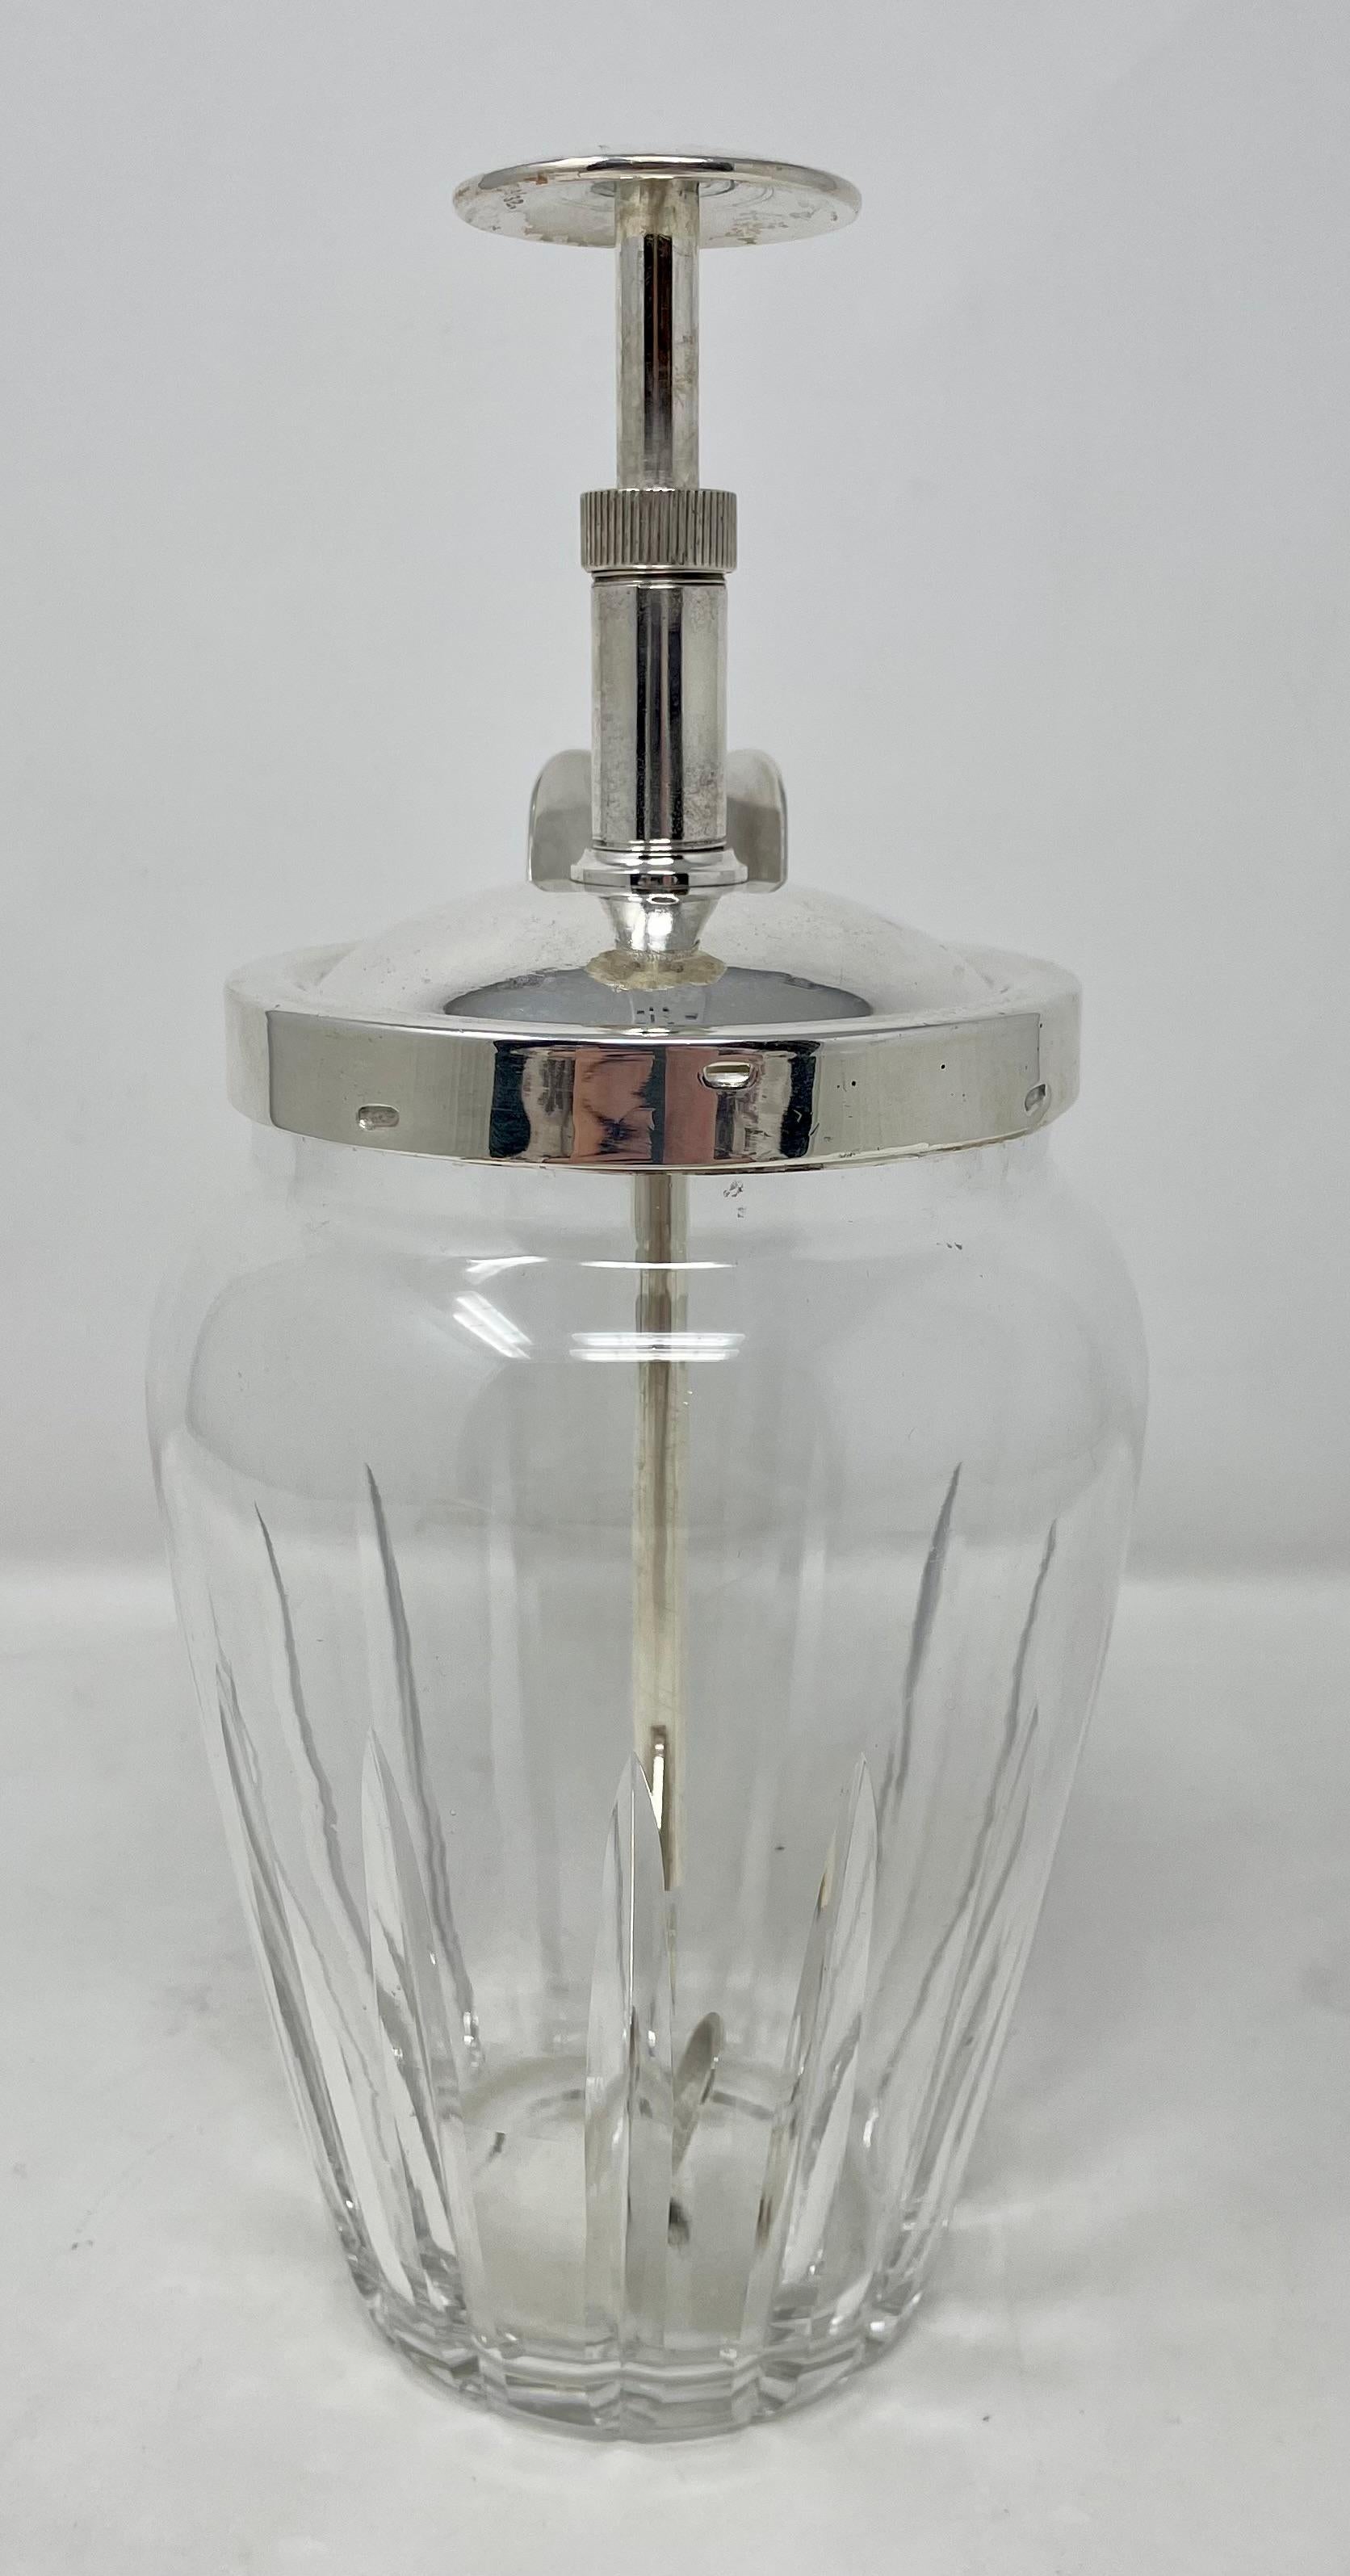 Estate Art Deco Silver-Plate & Cut Crystal Rapid Mixer Cocktail Shaker, ca 1930 In Good Condition For Sale In New Orleans, LA